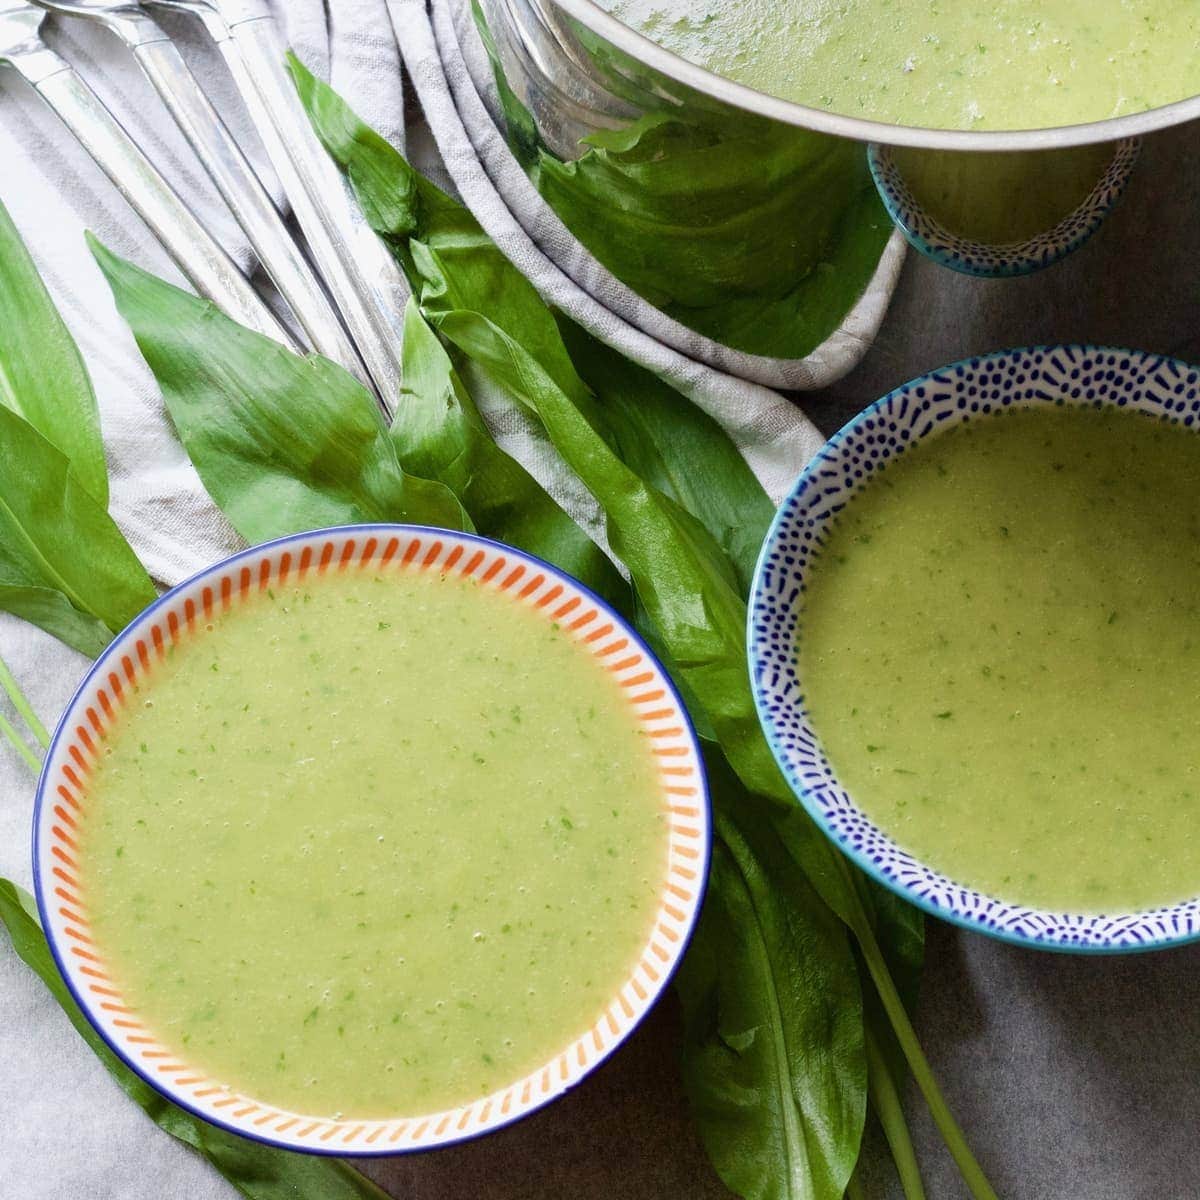 Wild garlic soup in bowls with leaves around.